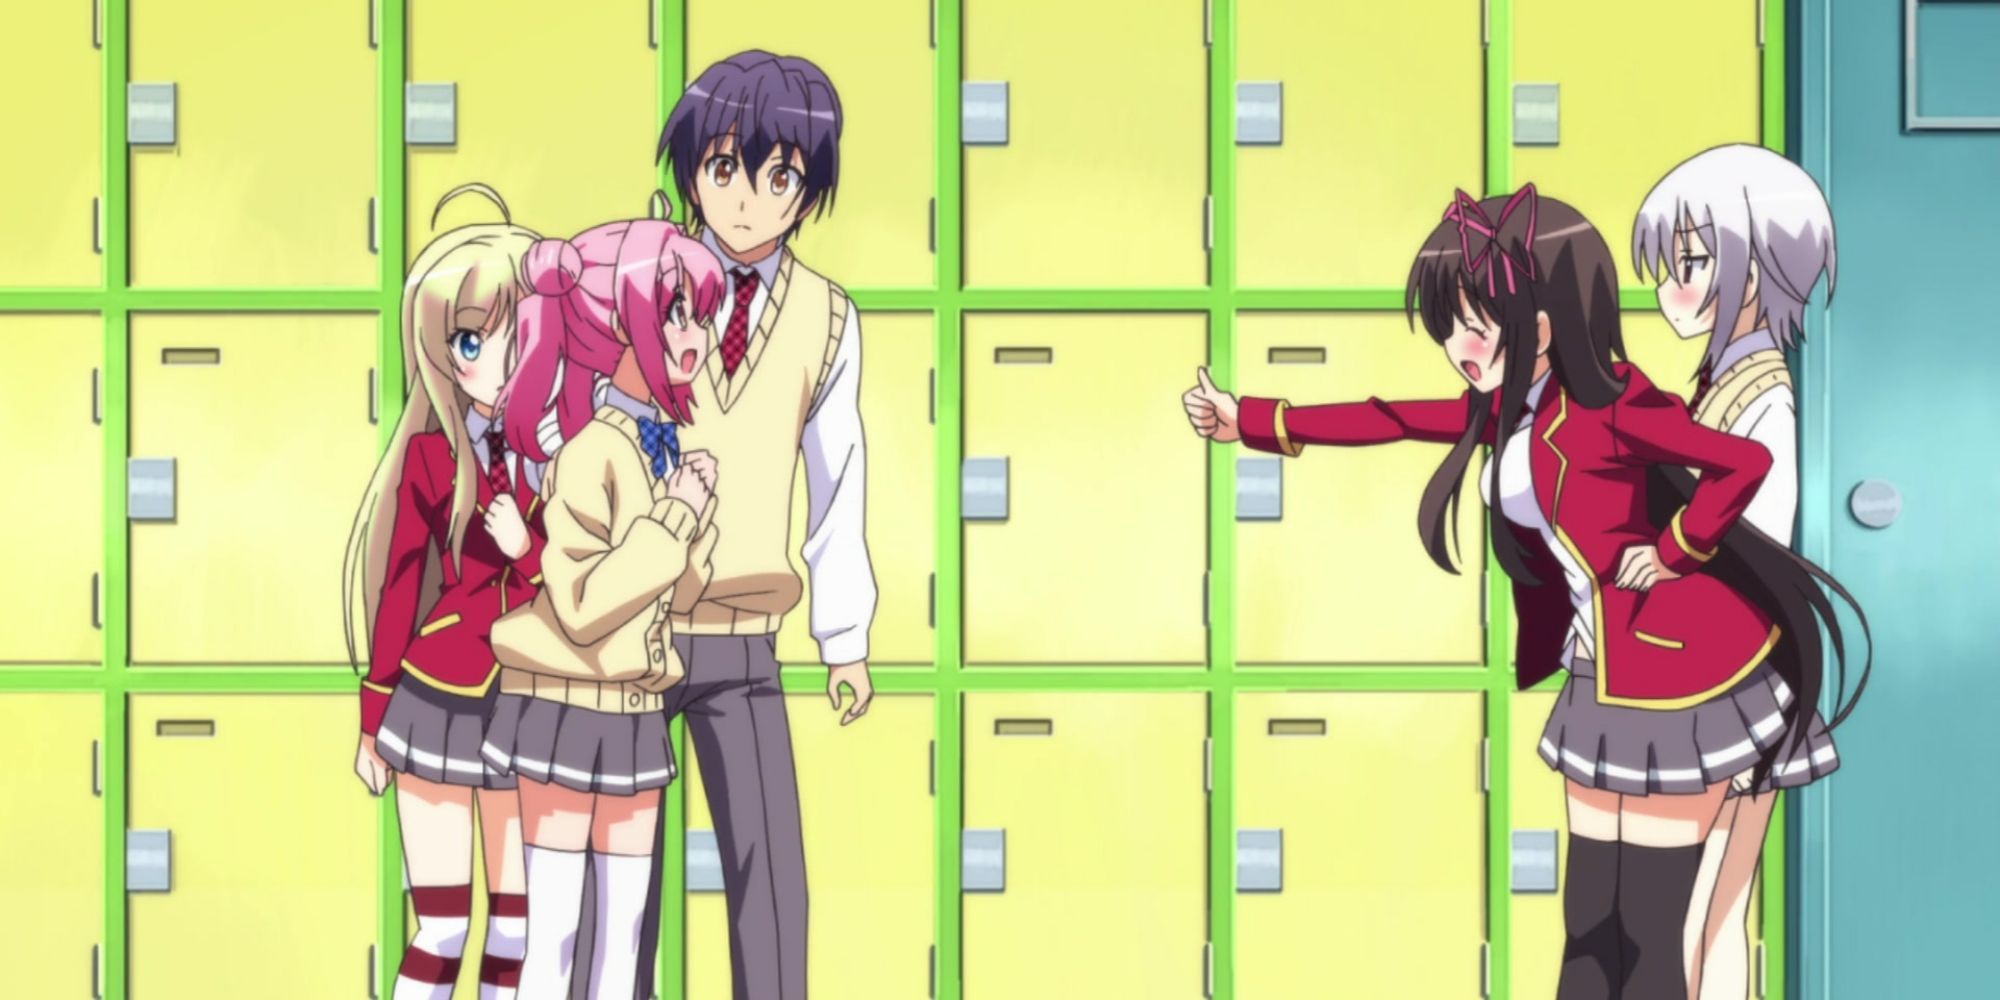 Five characters from Noucome anime at school